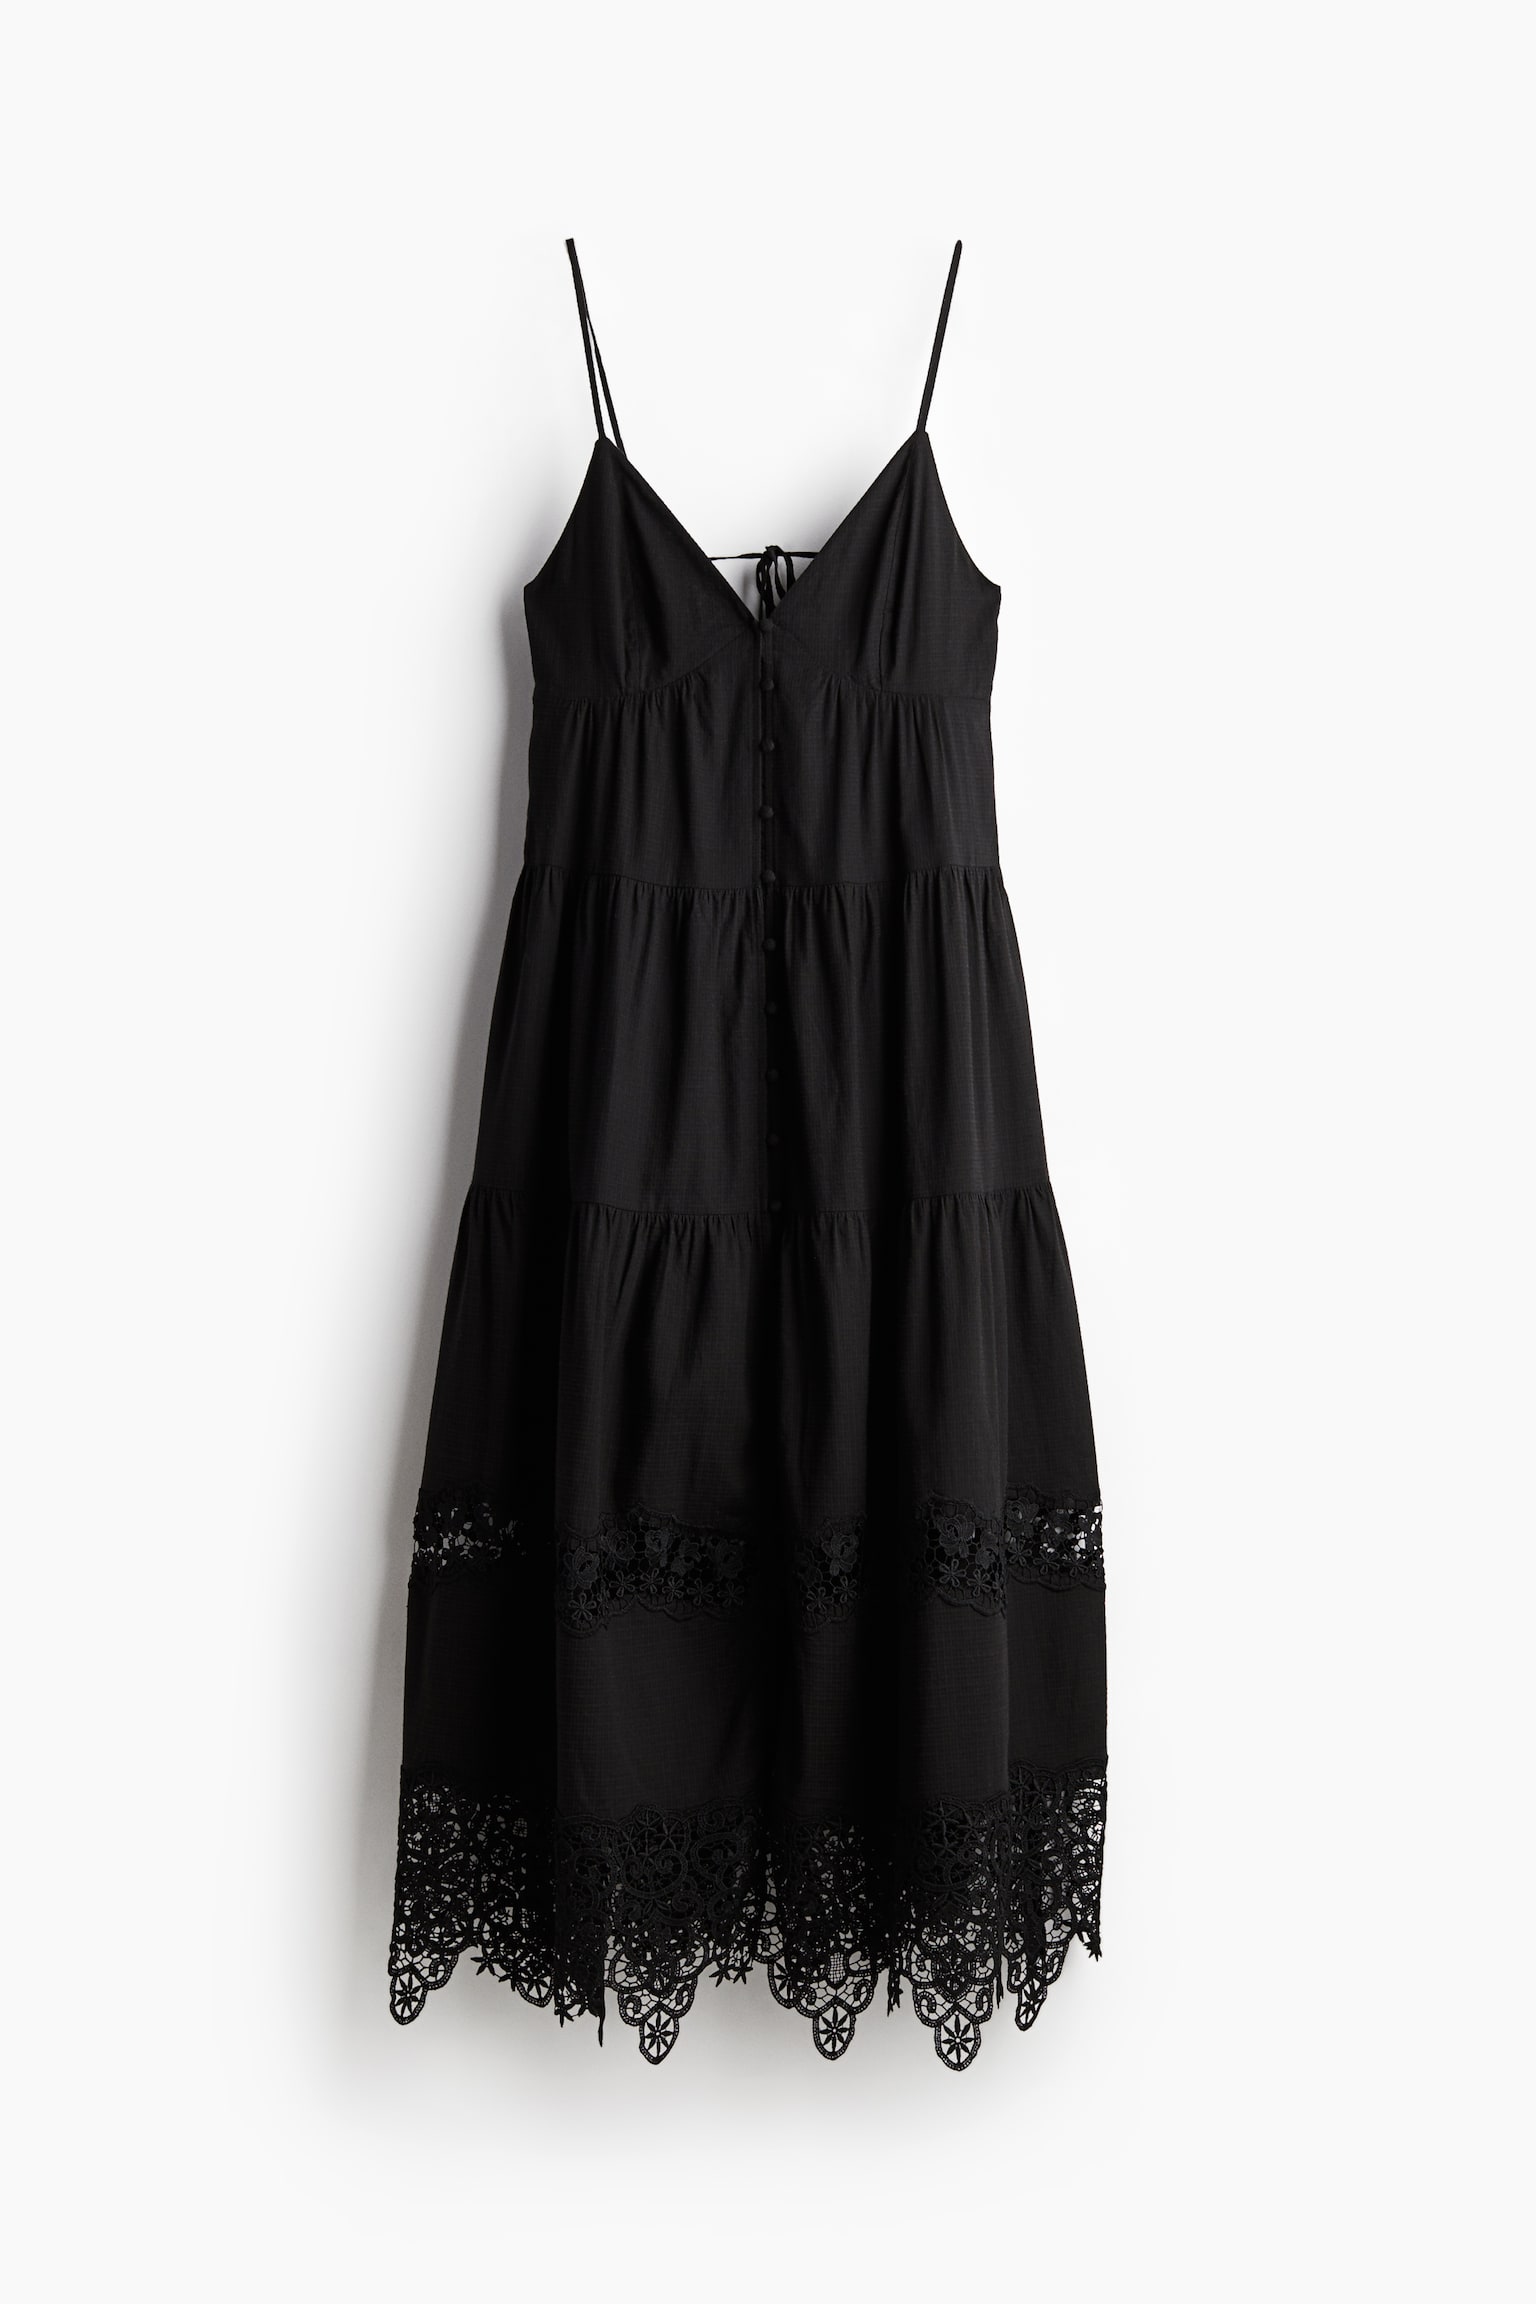 Lace-trimmed strappy dress - Black/White - 2